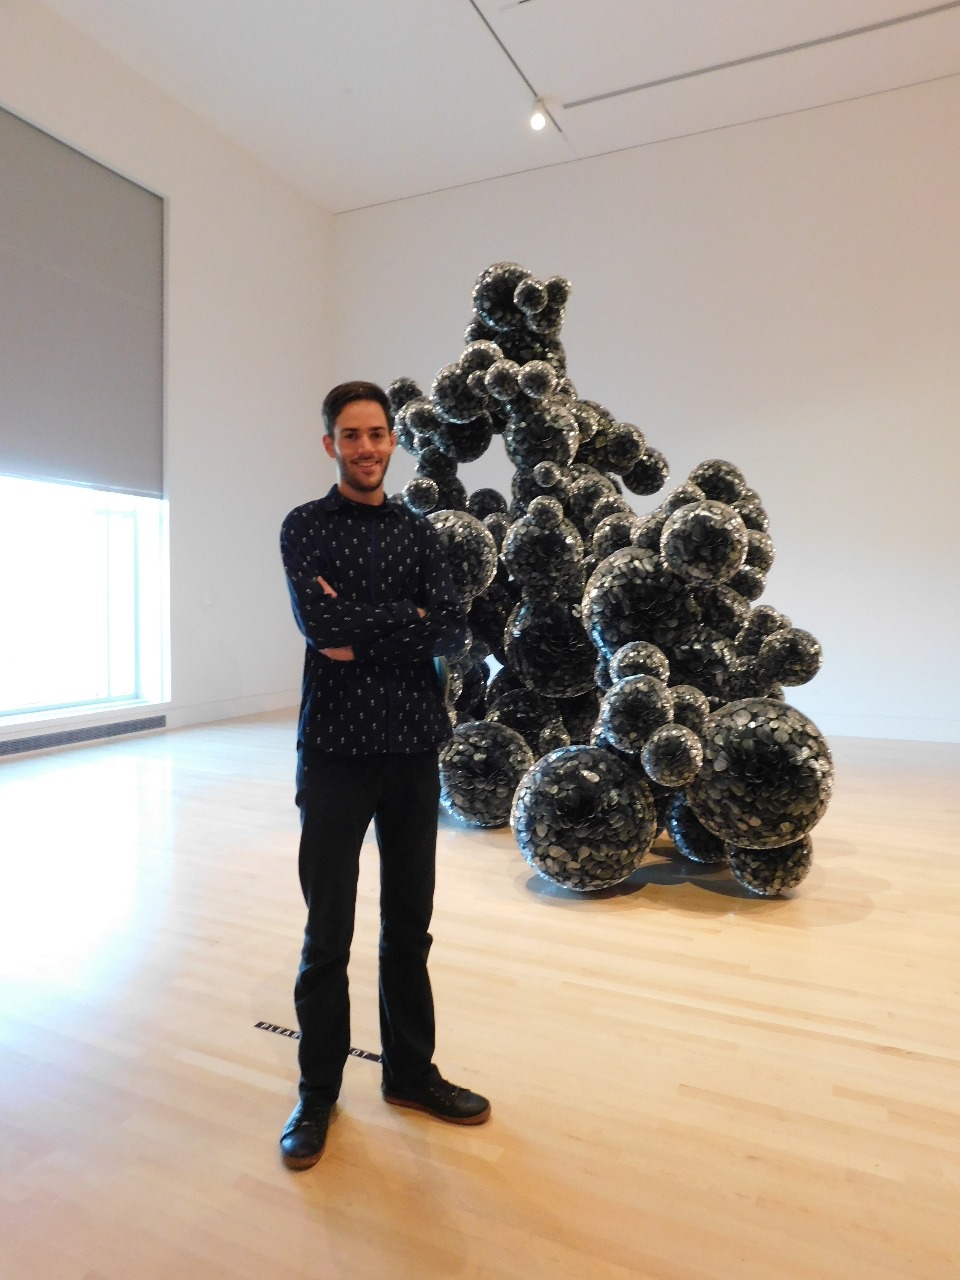 Student Tomás Lopez Cajaraville at the Indianapolis Museum of Art with the sculpture “Untitled (Mylar)” by Tara Donovan, which he describes as "one of the most fascinating contemporary sculptures I have ever seen."